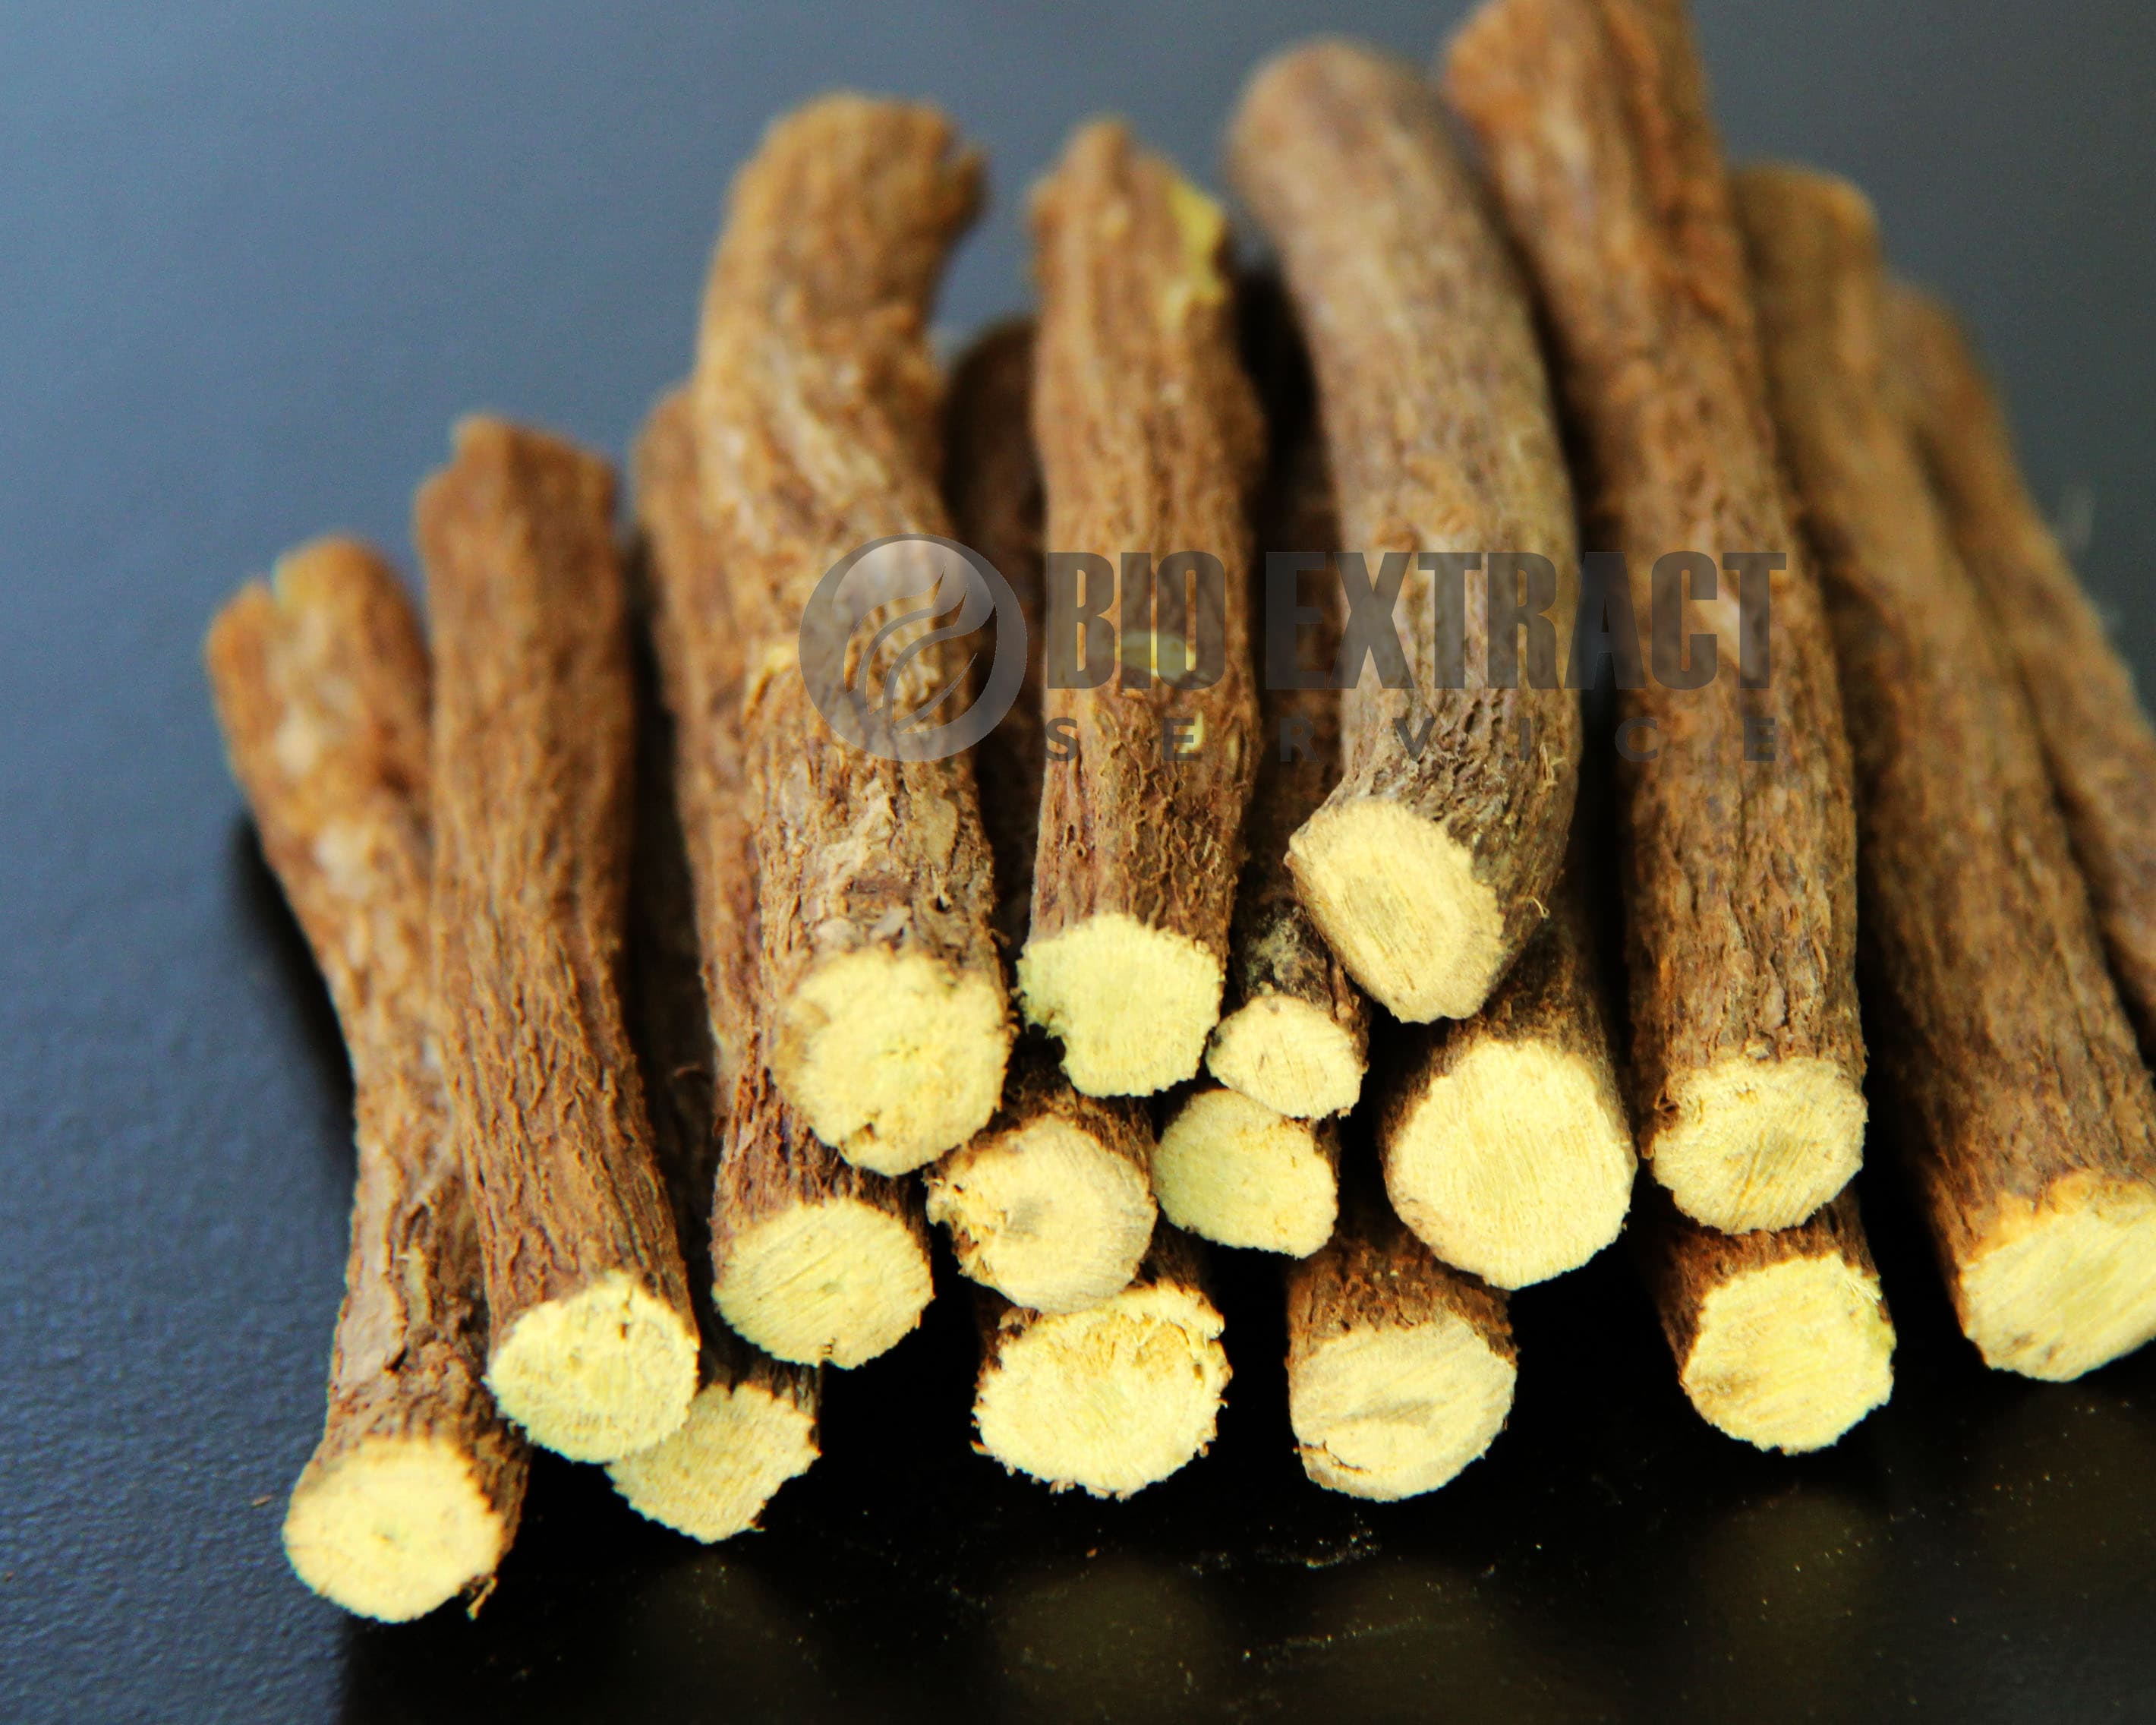 Licorice root sticks selected